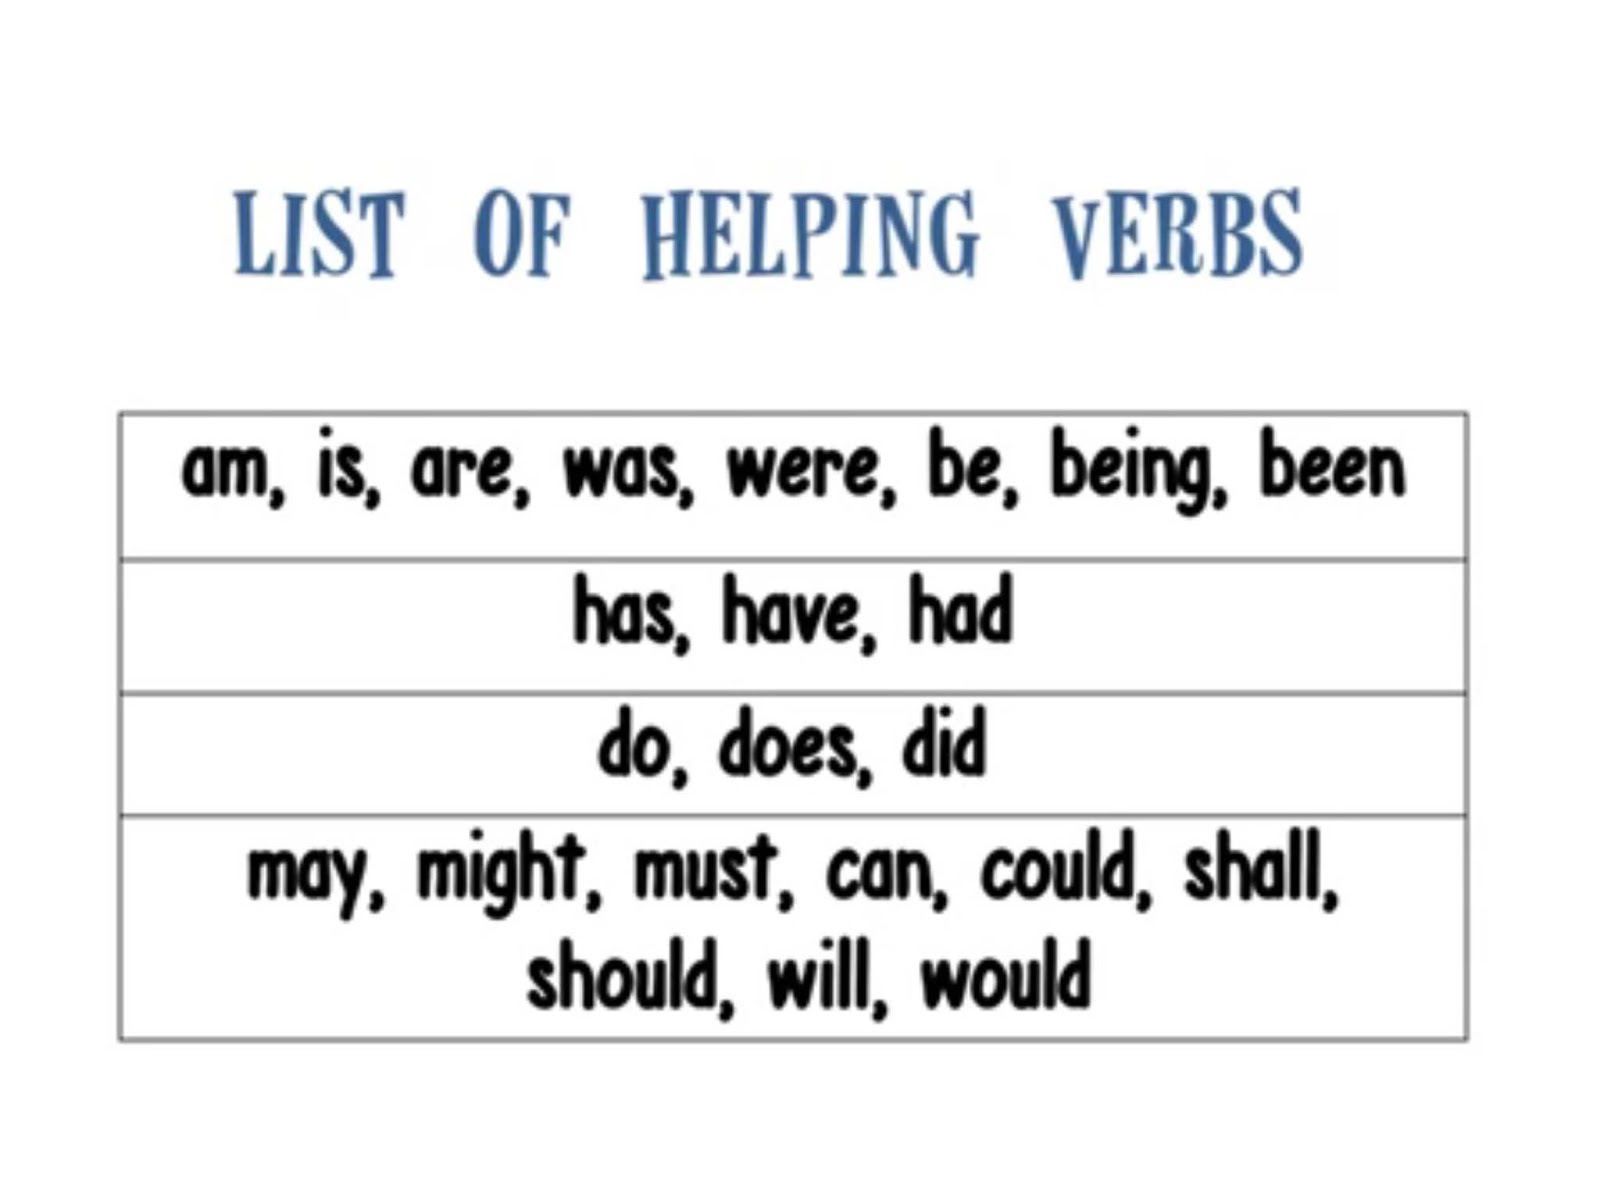 english-5-class-of-2025-helping-verbs-verb-phrases